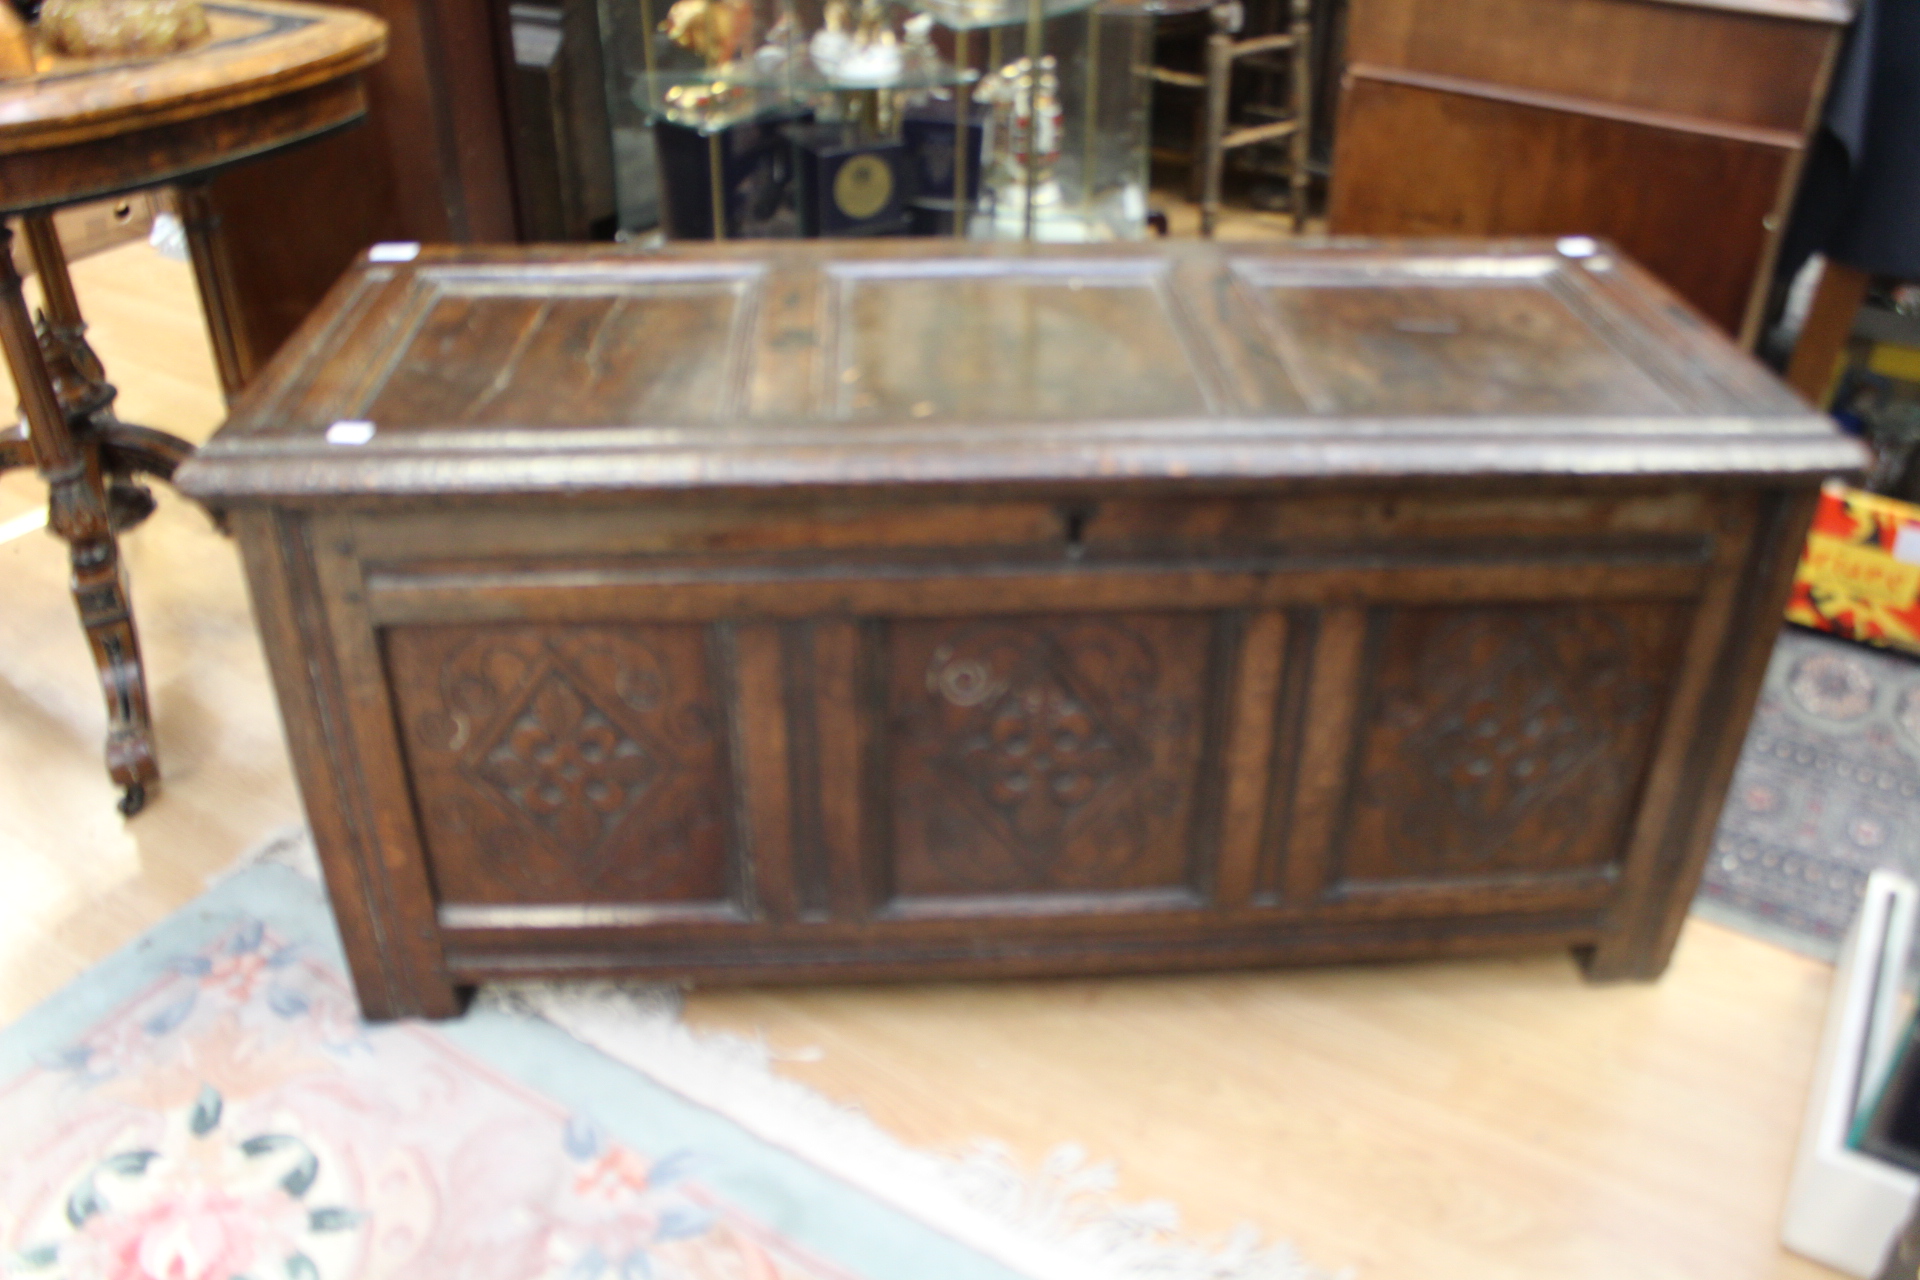 An early 18th Century carved oak blanket chest with candle box inside